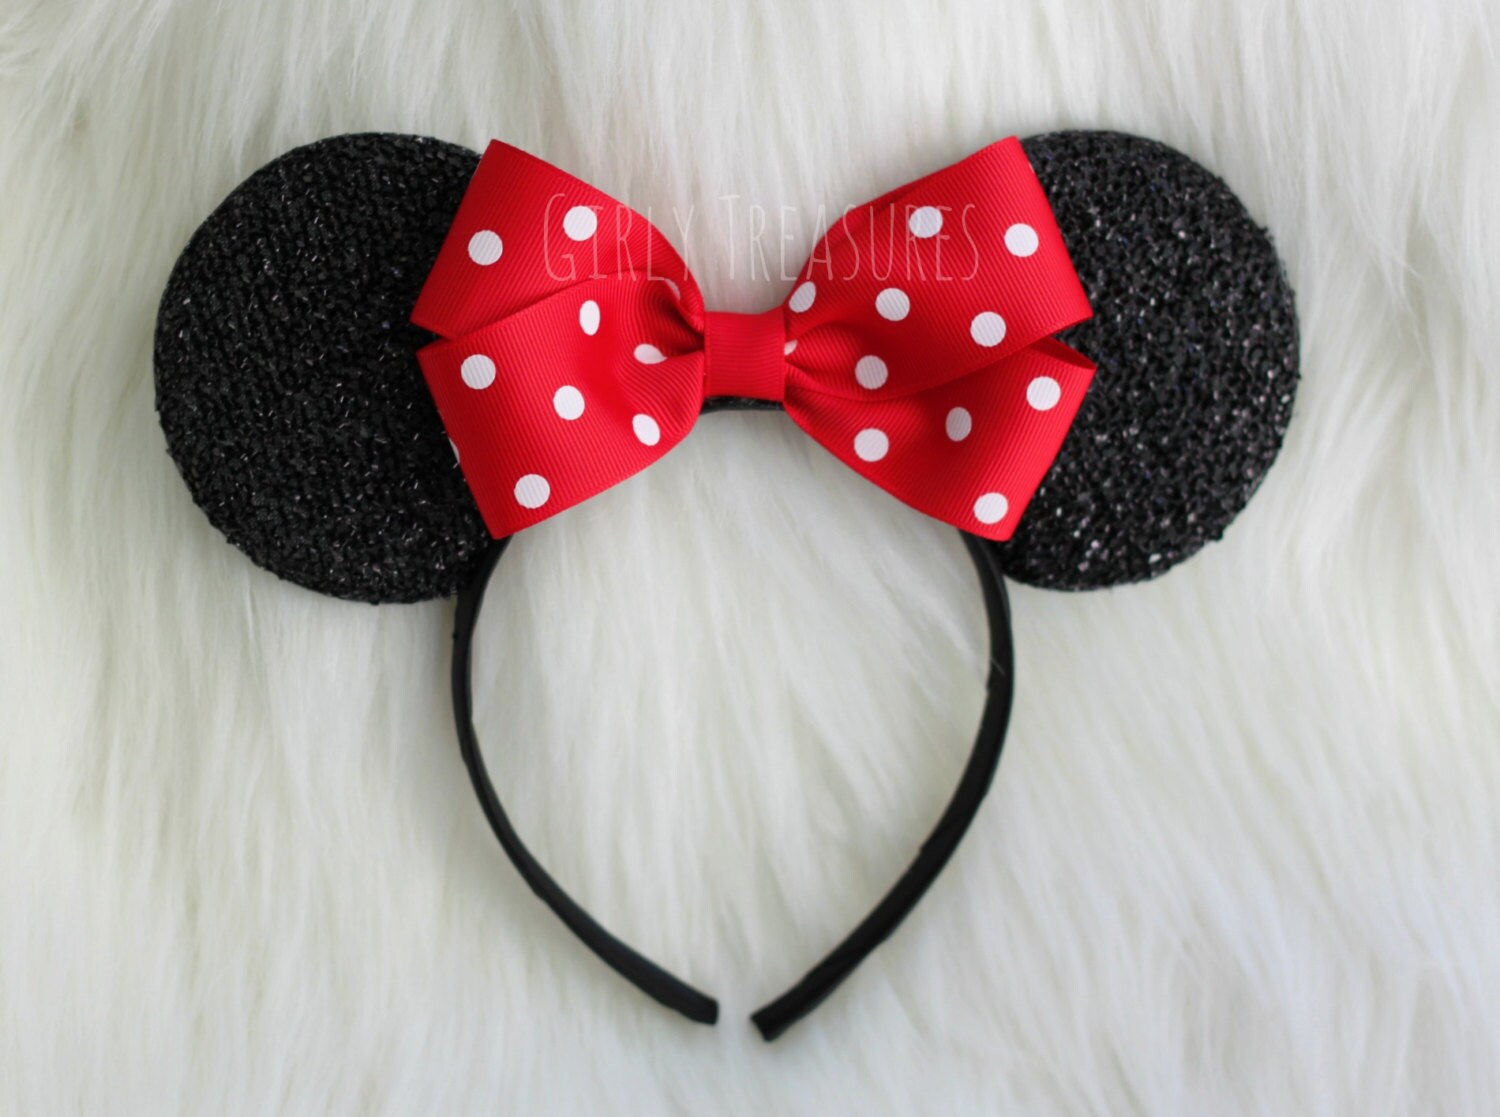 Minnie Mouse Ears Headband Polka Dot Bow Party Costume Accessory, Size: One Size